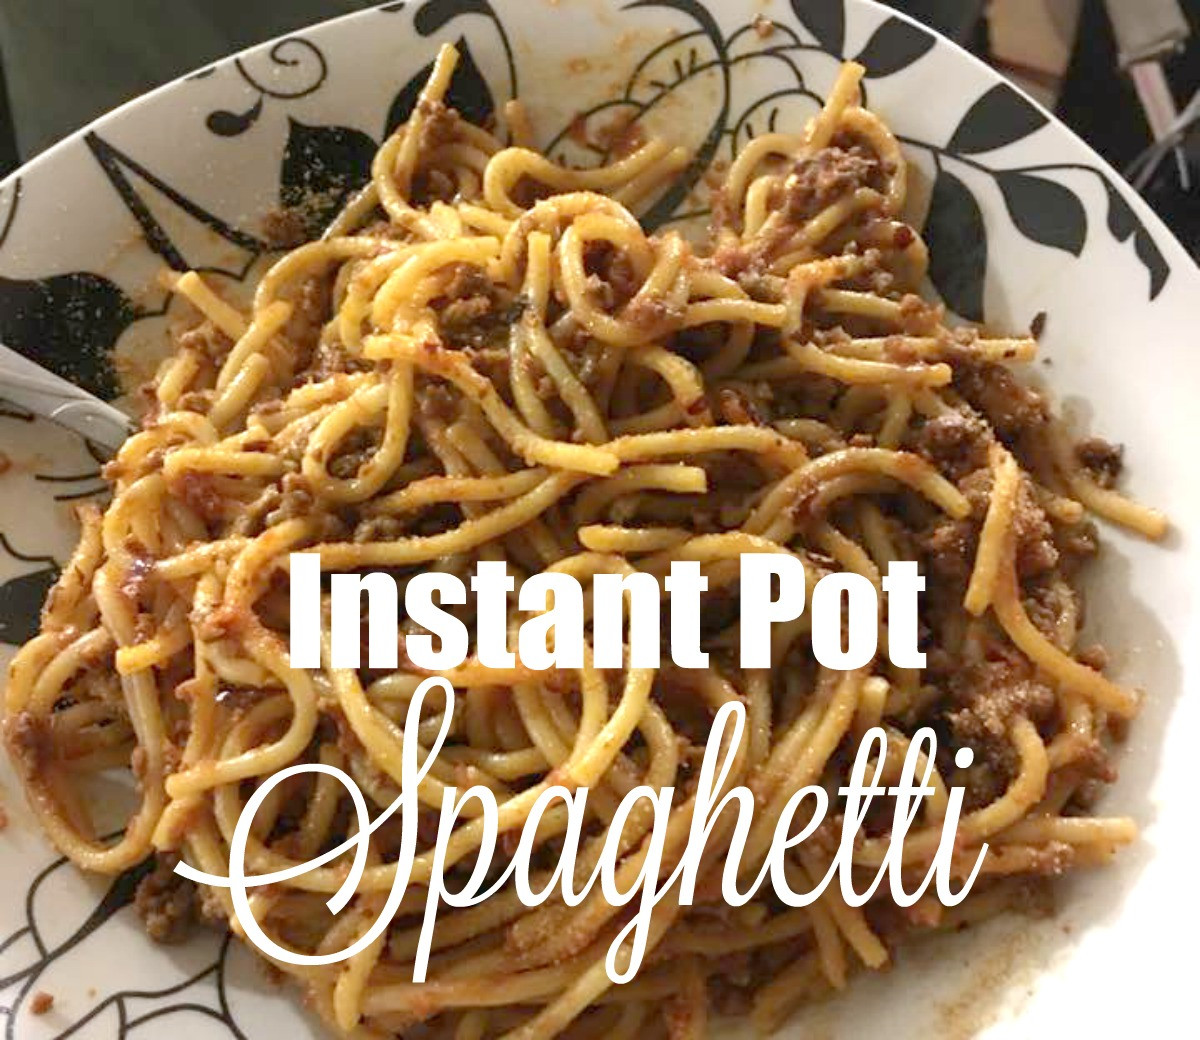 Instant Pot Spaghetti With Jar Sauce
 Reviews Chews & How Tos Instant Pot Spaghetti